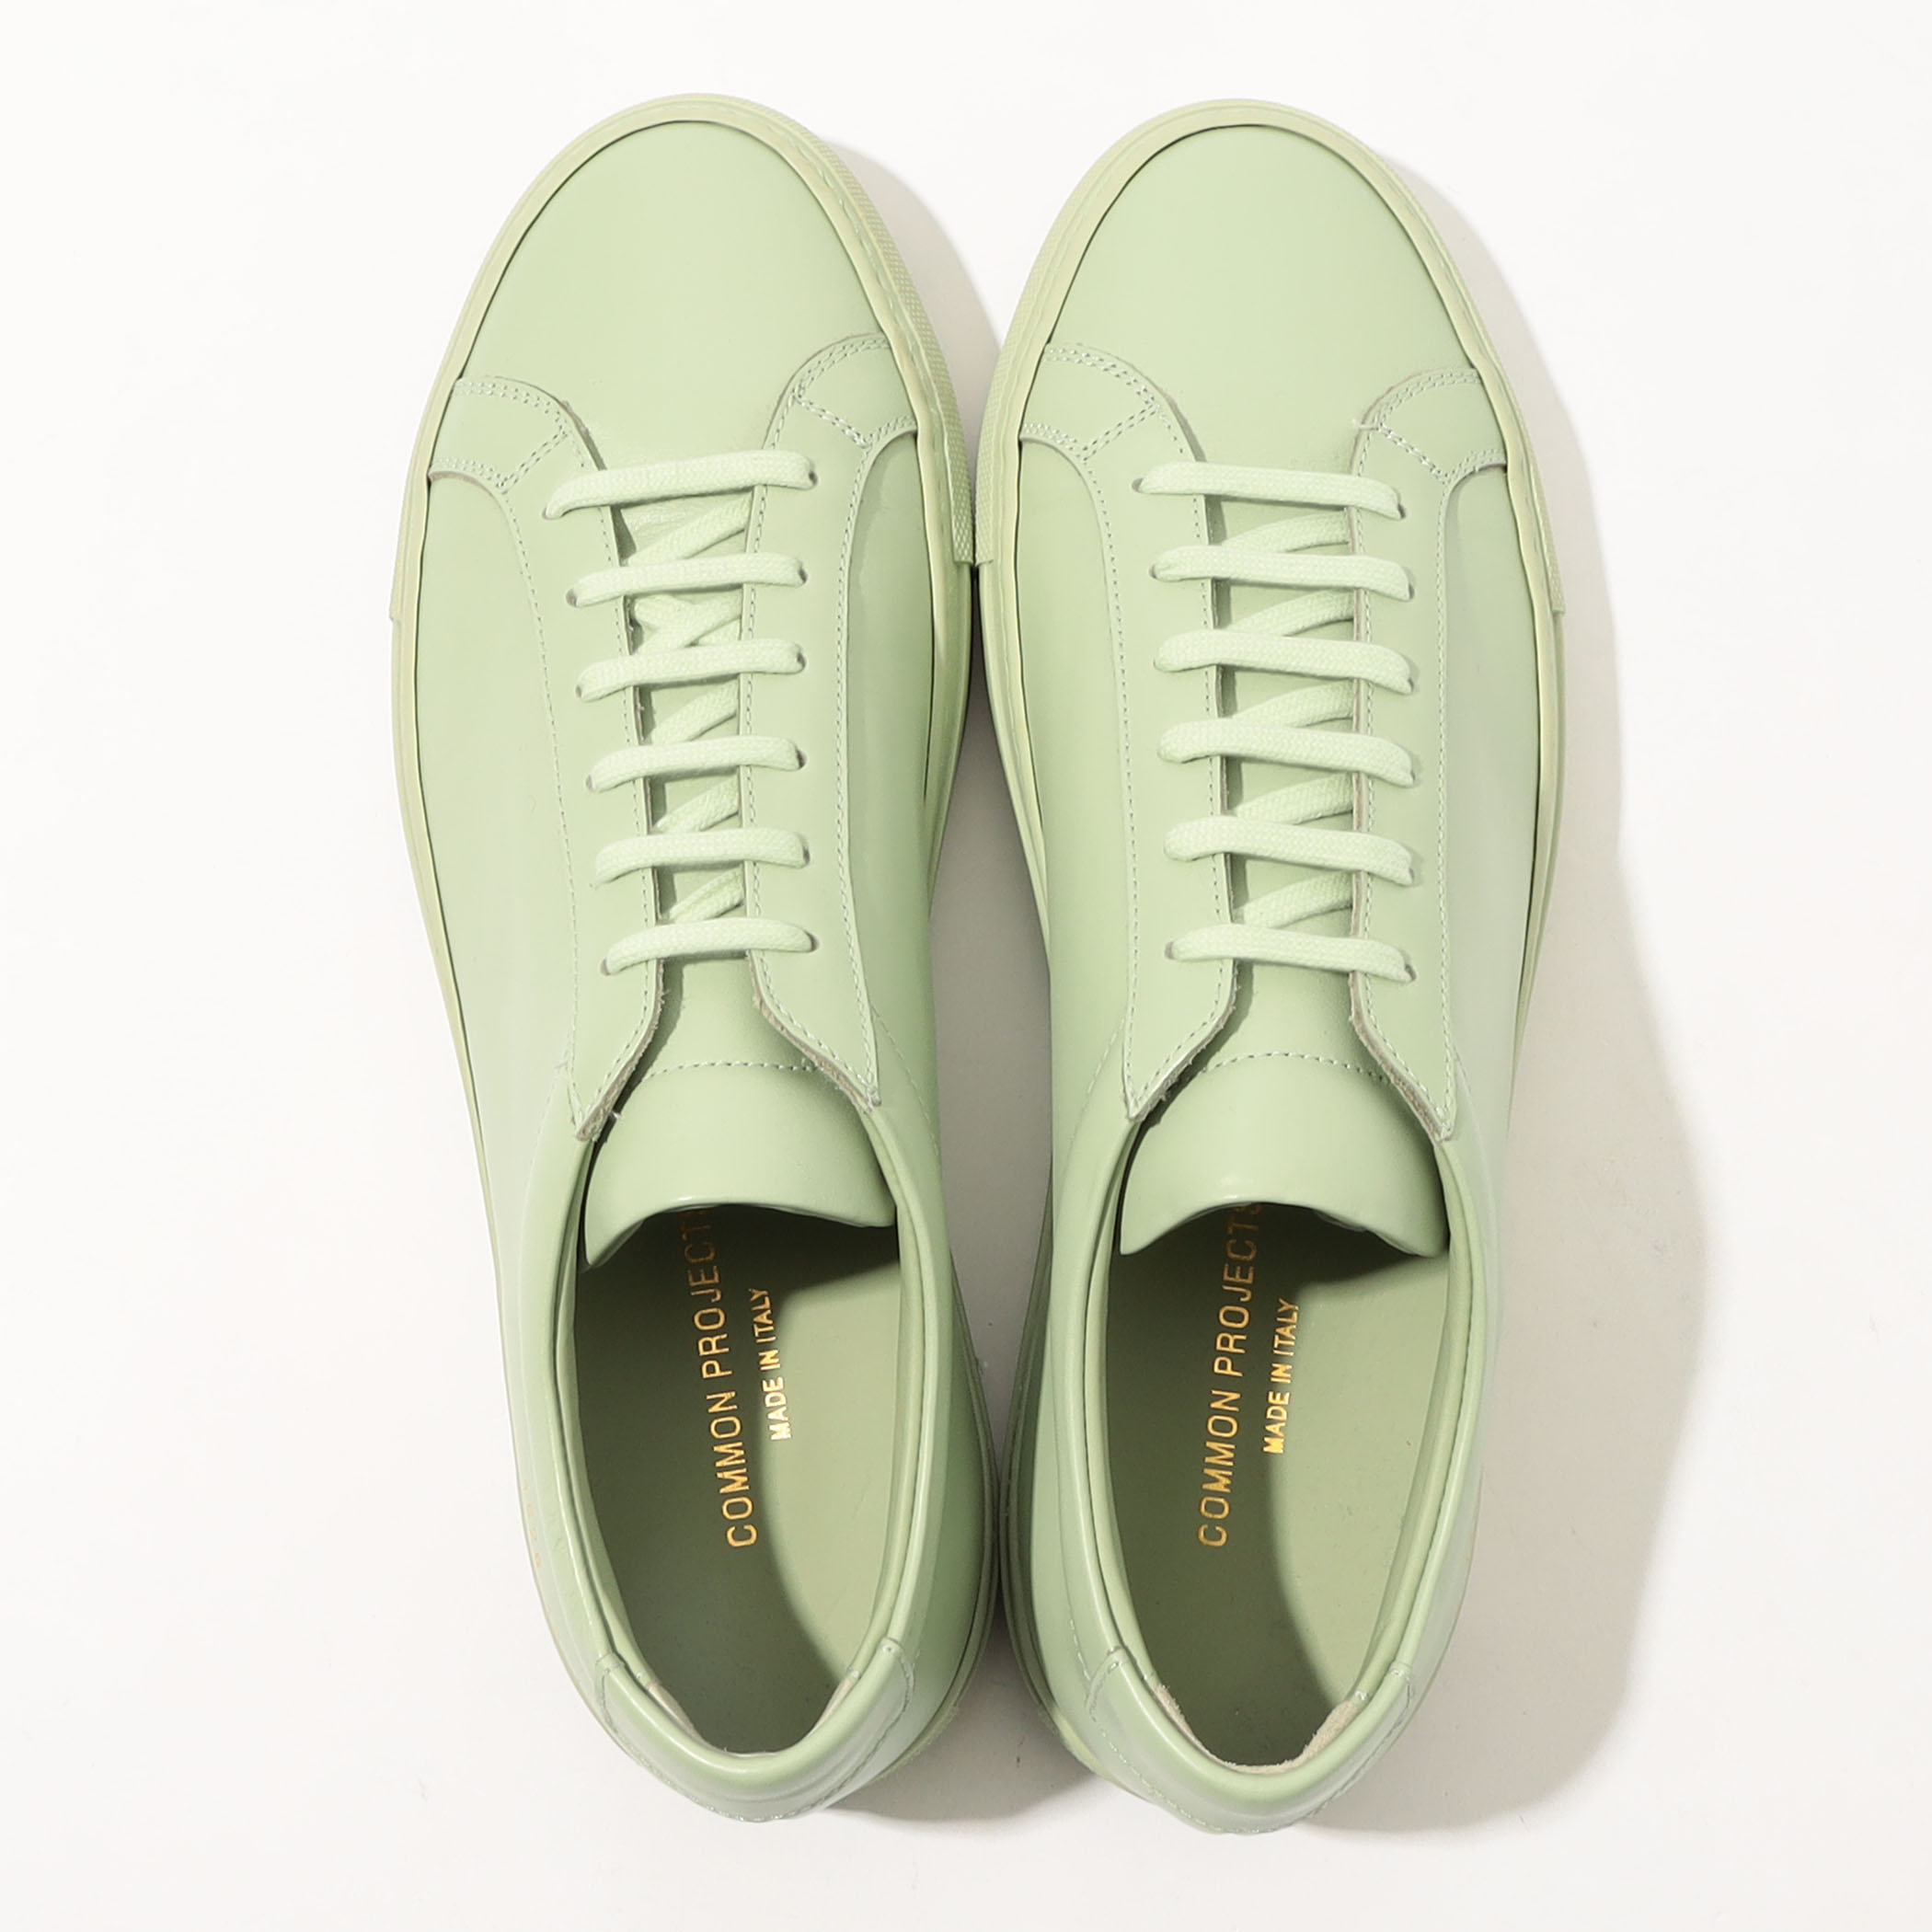 COMMON PROJECTS Achilles Low スニーカー｜トゥモローランド 公式通販